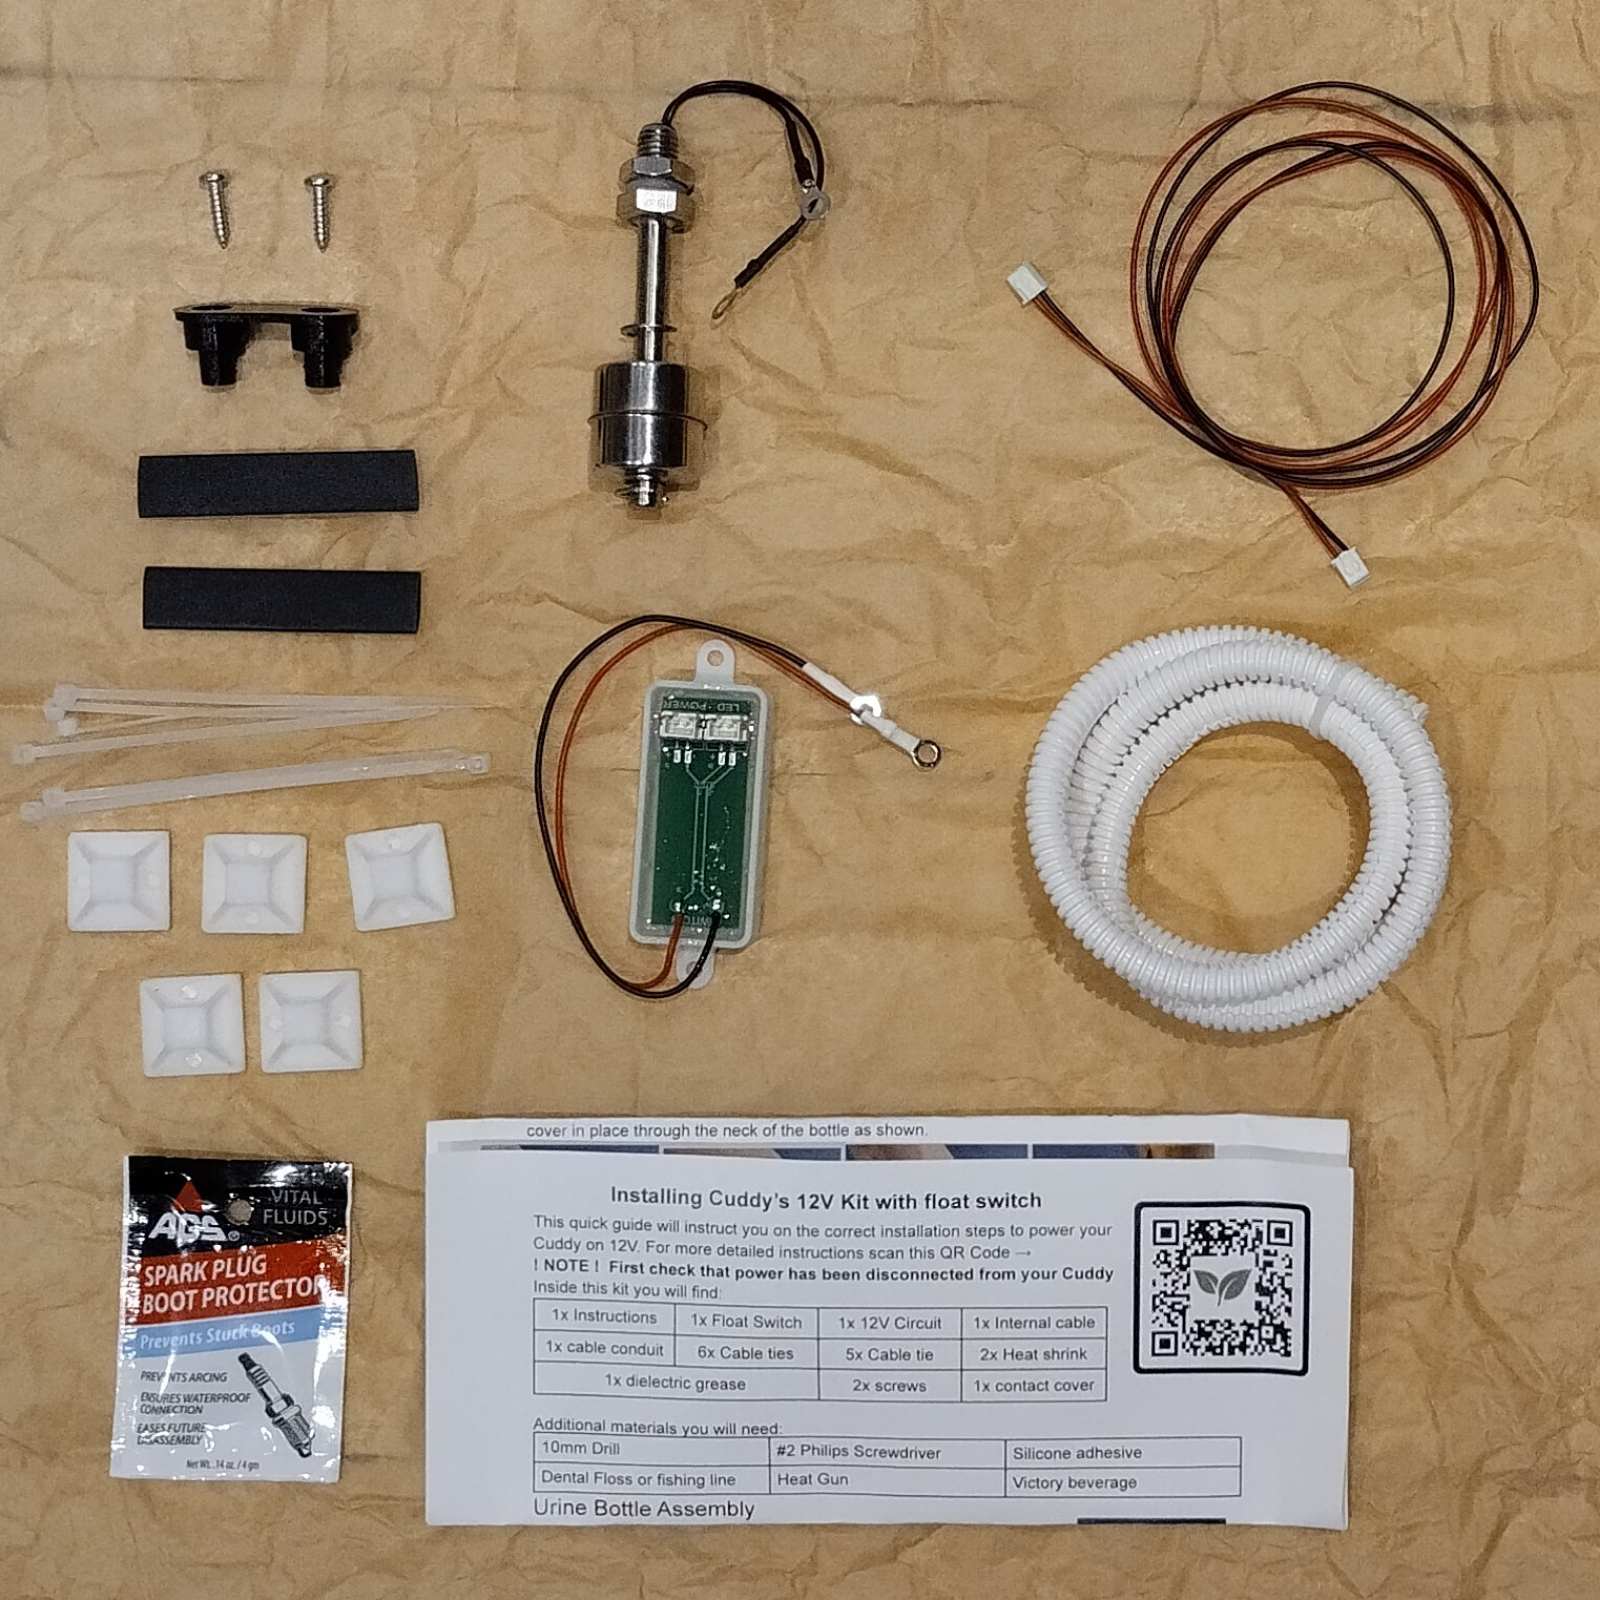 the items in the 12v kit for Cuddy composting toilet